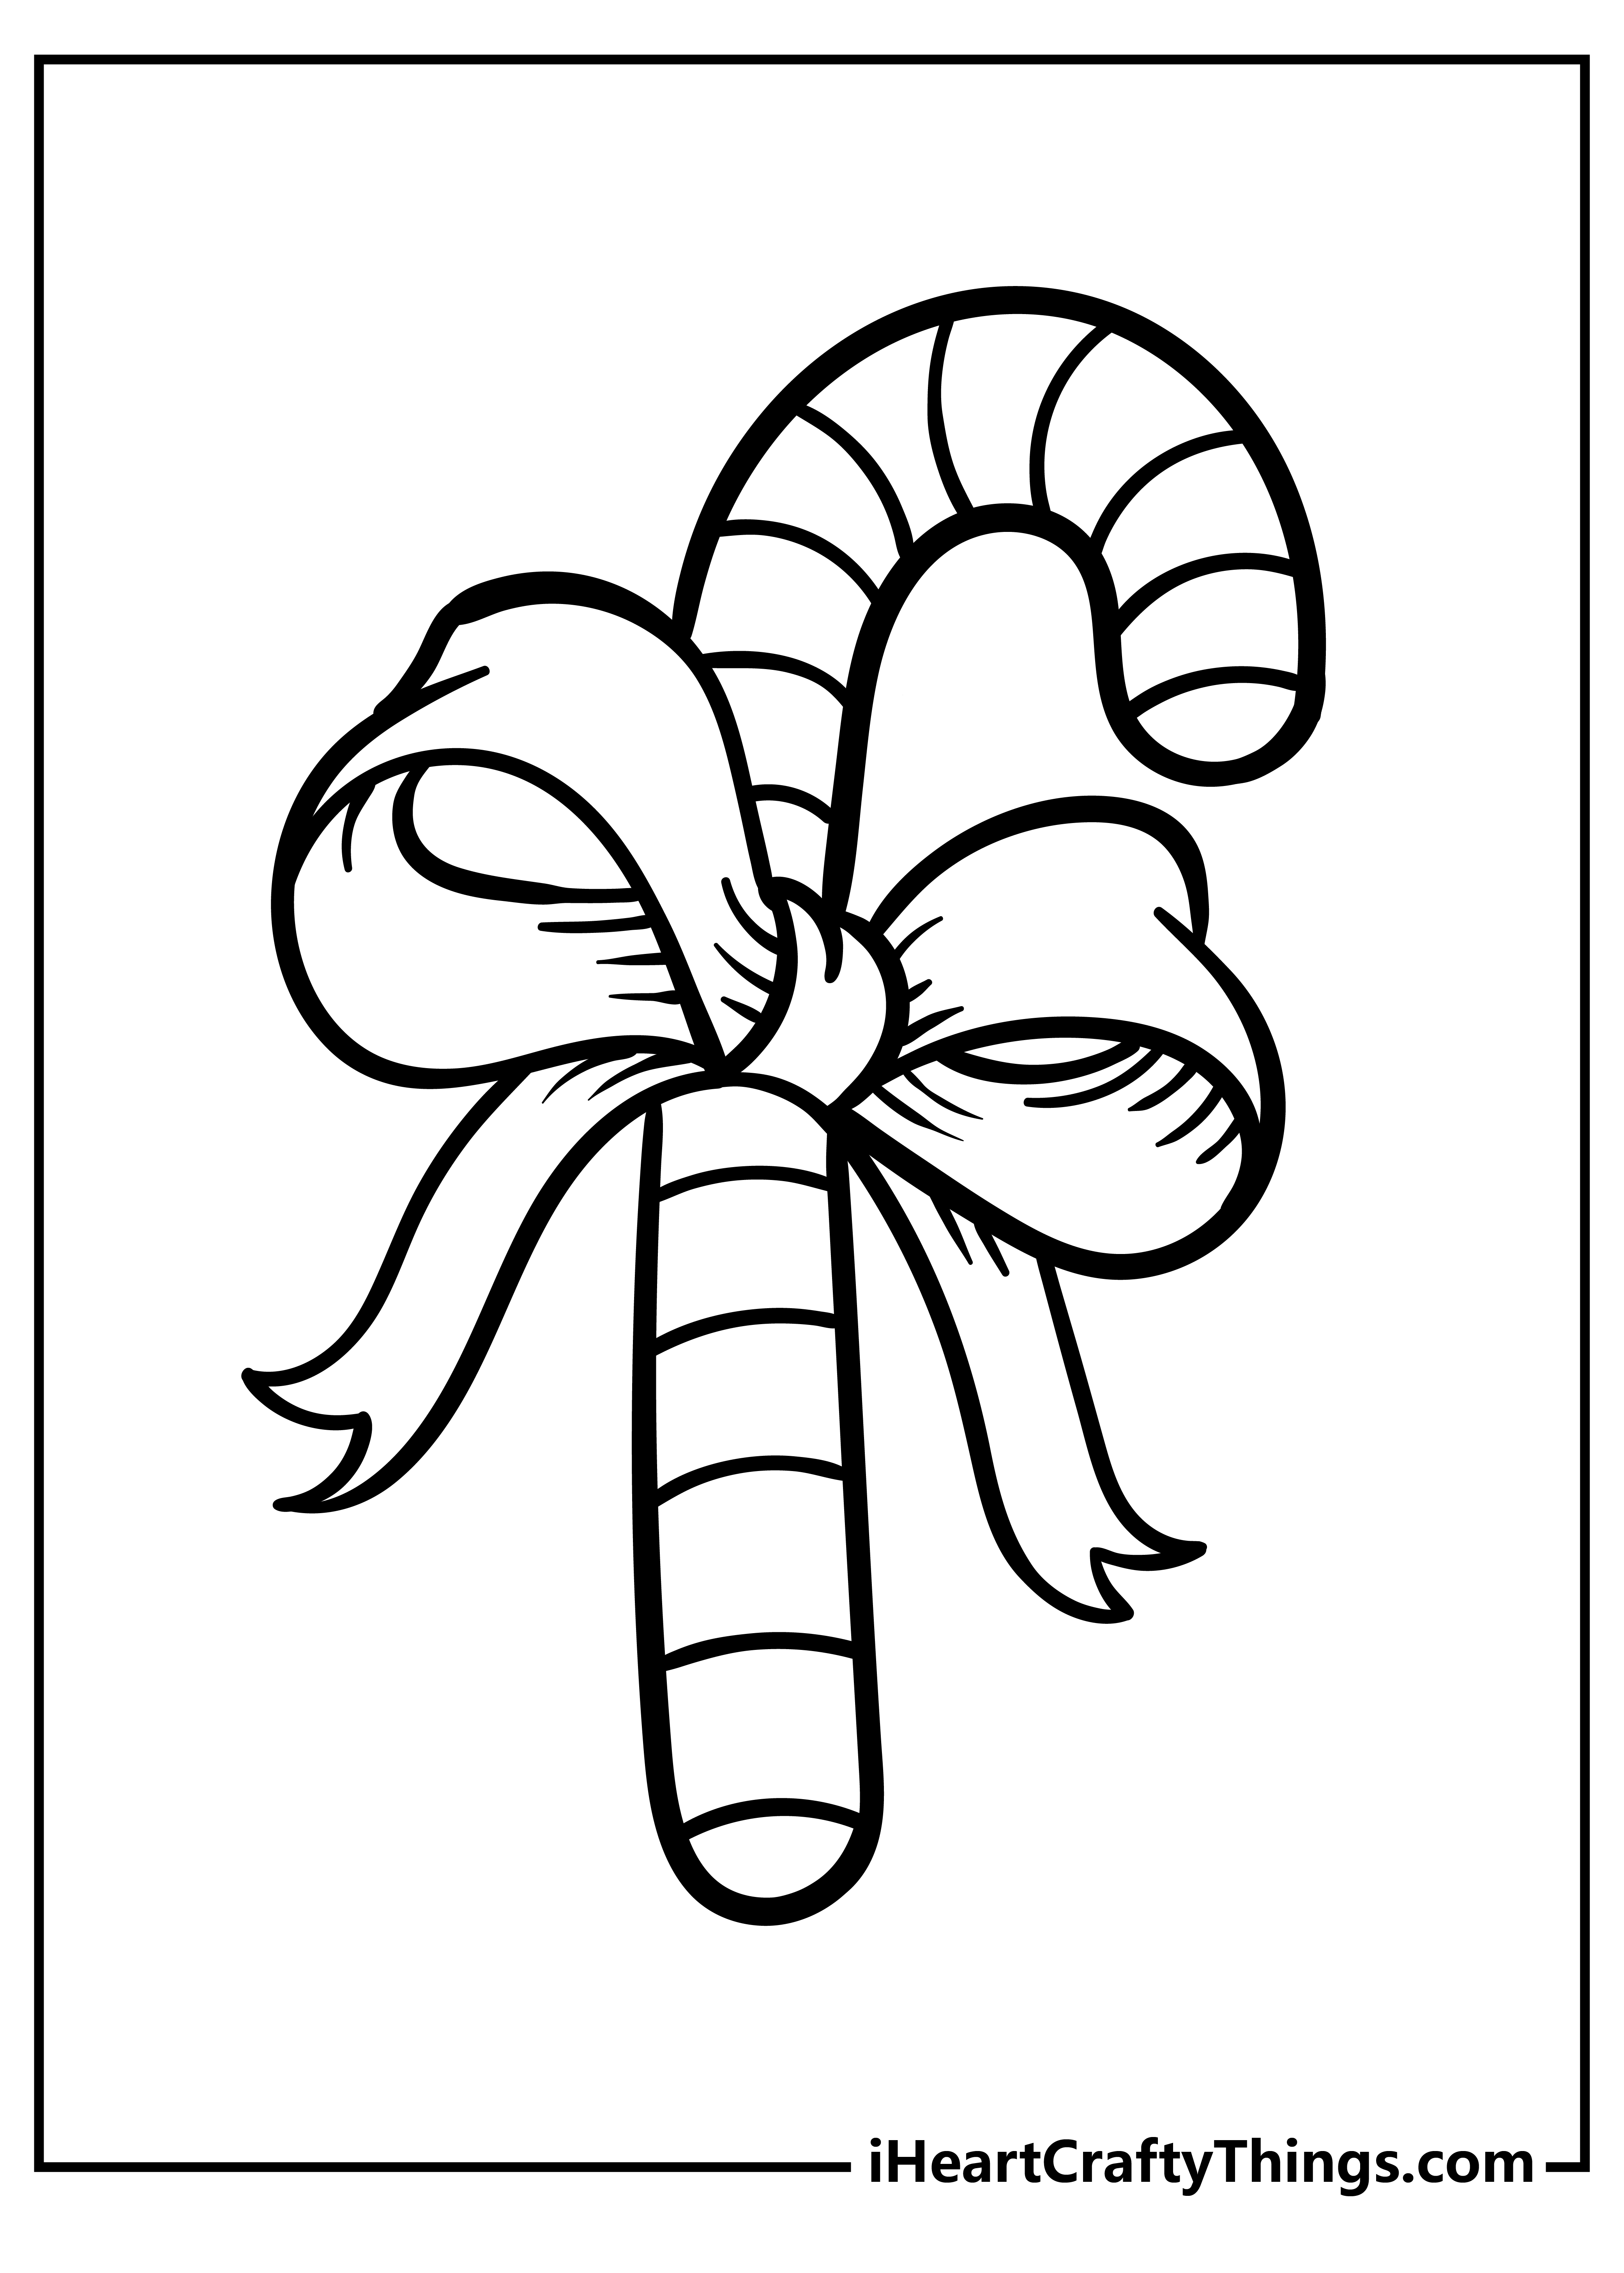 Candy Cane Coloring Pages free pdf download